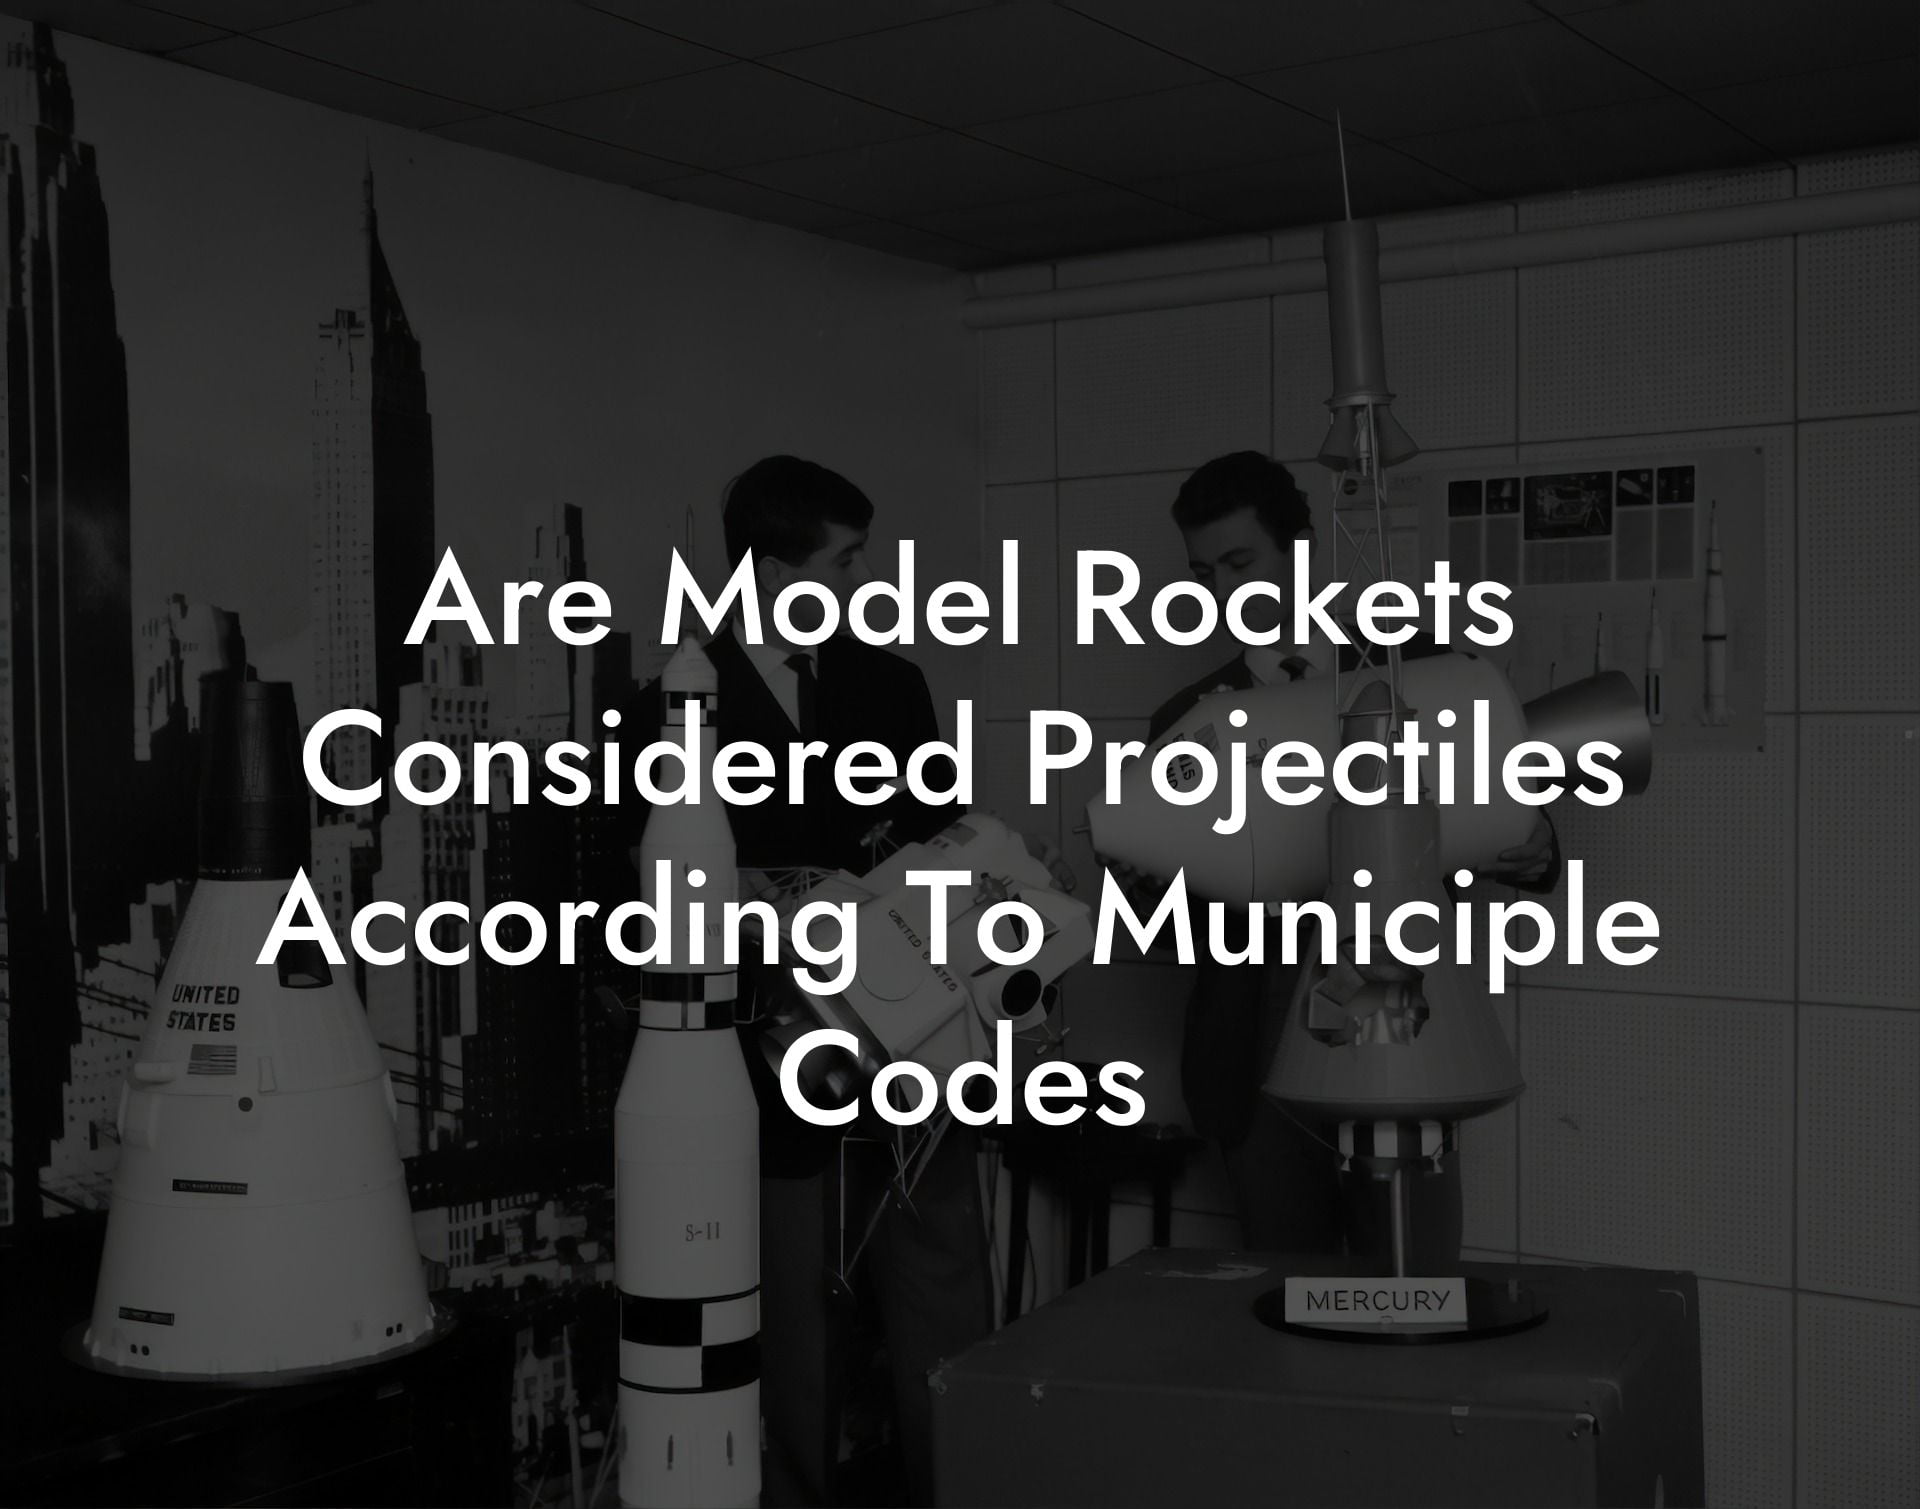 Are Model Rockets Considered Projectiles According To Municiple Codes